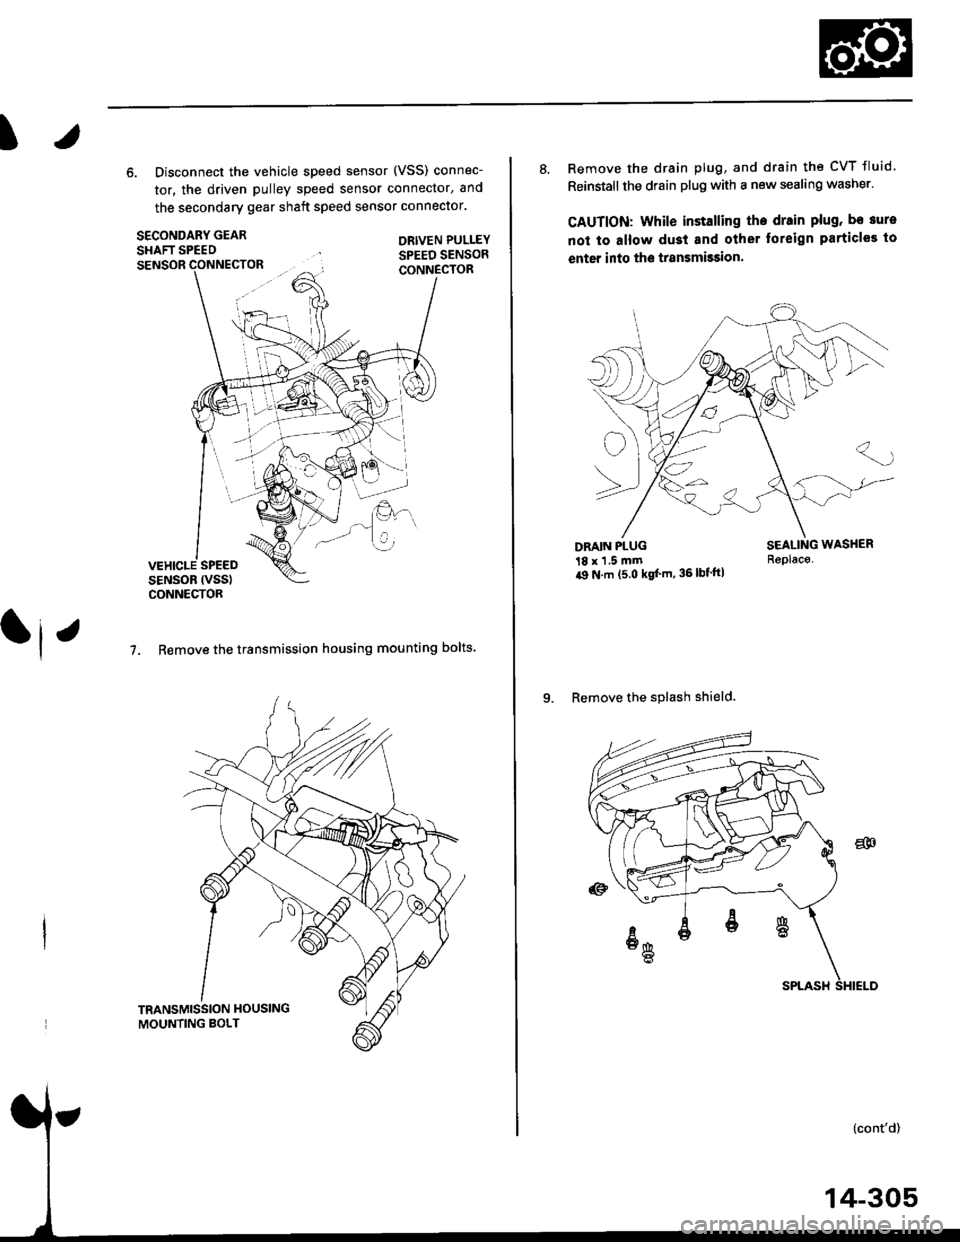 HONDA CIVIC 1997 6.G User Guide I
6. Disconnect the vehicle speed sensor (VSS) connec-
tor, the driven pulley speed sensor connector, and
the secondary gear shaft speed sensor connector.
SECONDARY GEARSHAFT SPEEDORIVEN PULLEY
SPEED 